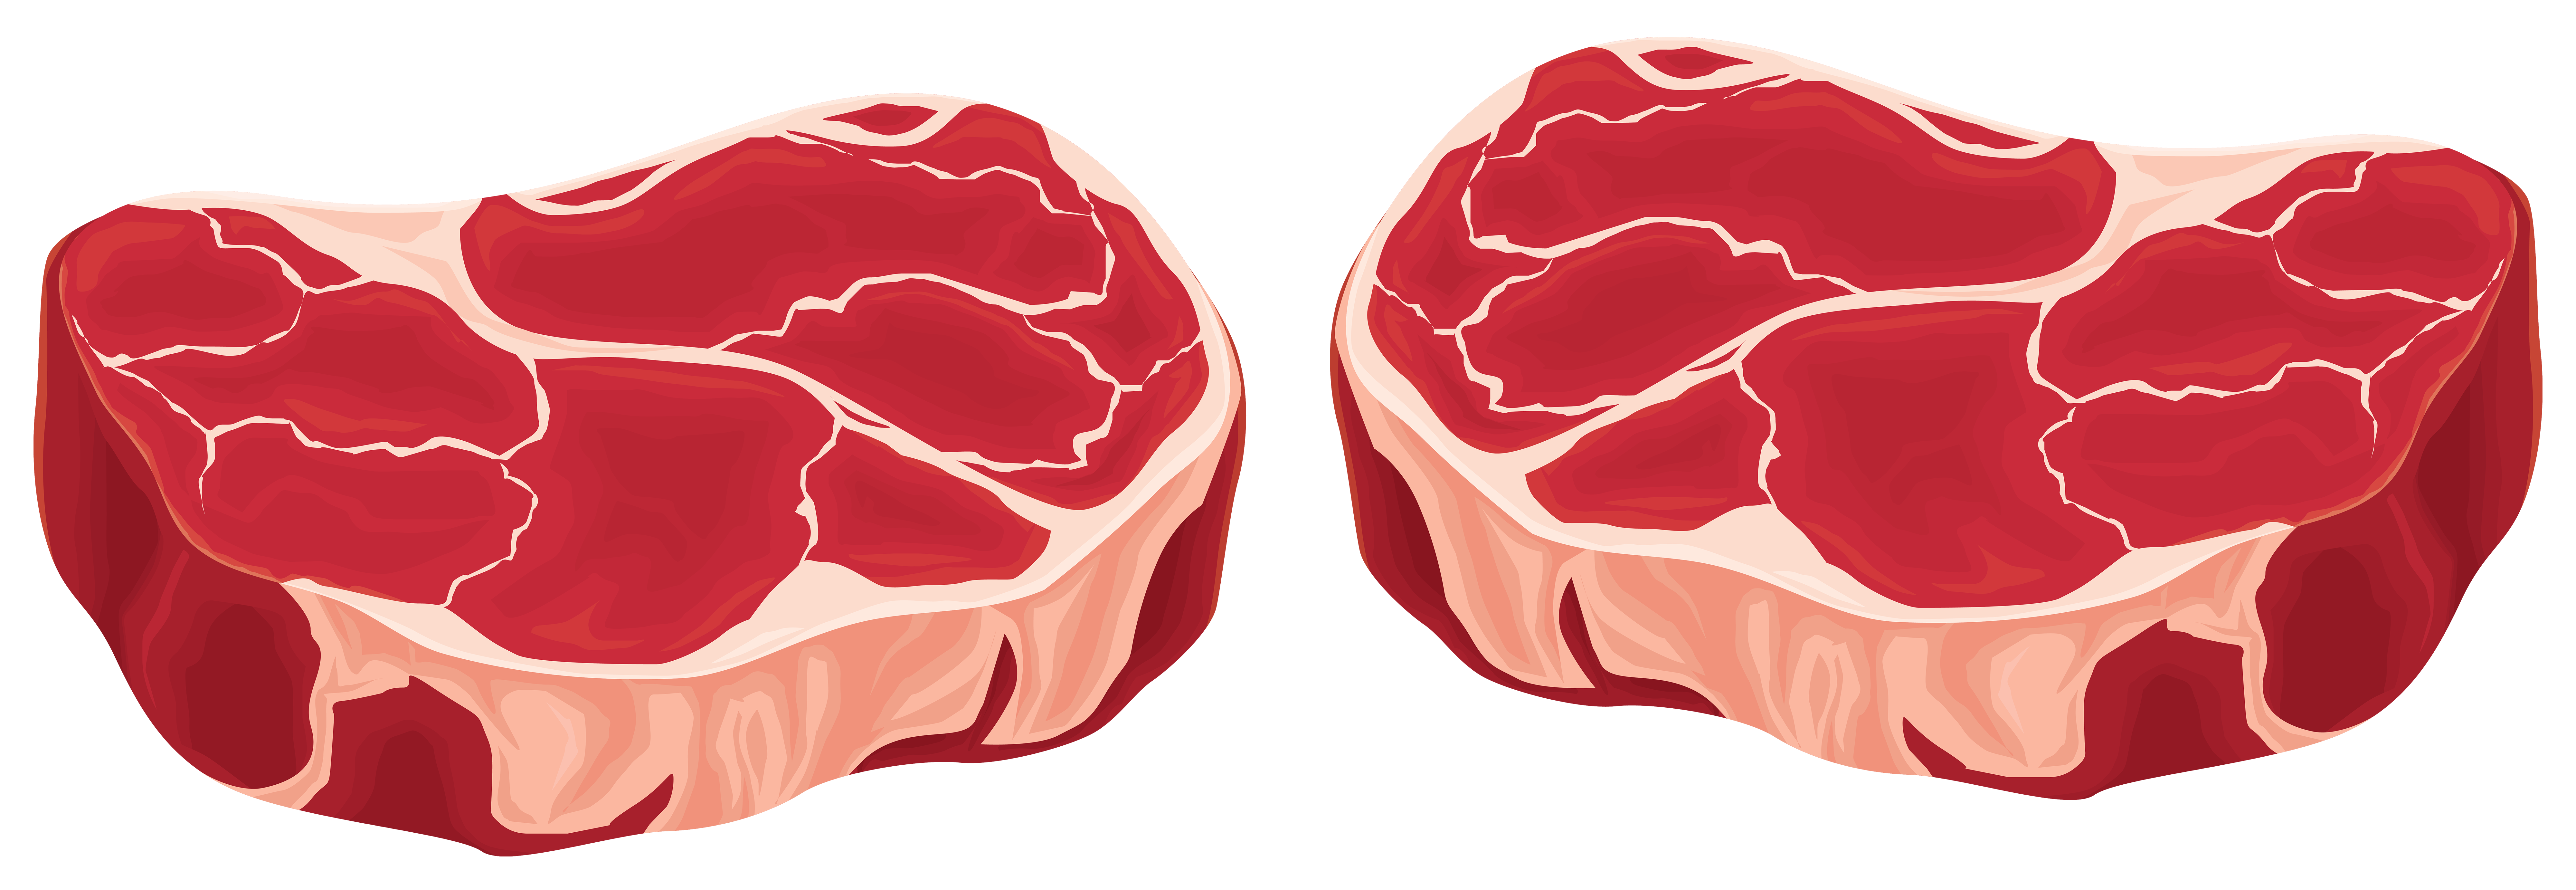 Meat clipart - Clipground